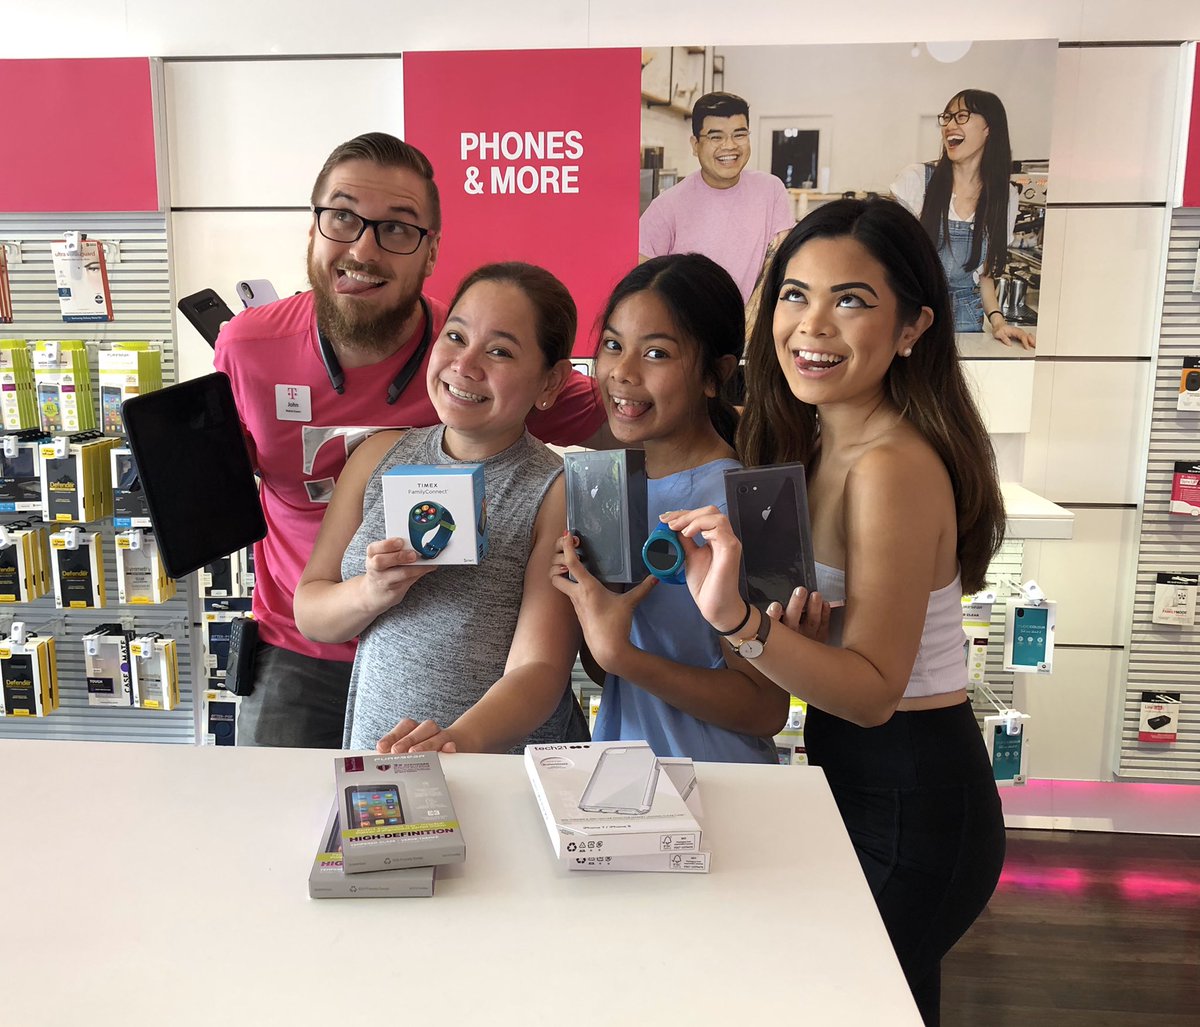 John out here providing the complete solution by connecting parents to what matters most!! Timex Family Watch, an amazing tool for families to keep their loved little ones connected! #2WayCalls #RealTimeLocationSharing #SOSalerts #VoiceMessaging ⌚️ @venecoinorlando @JohnLegere